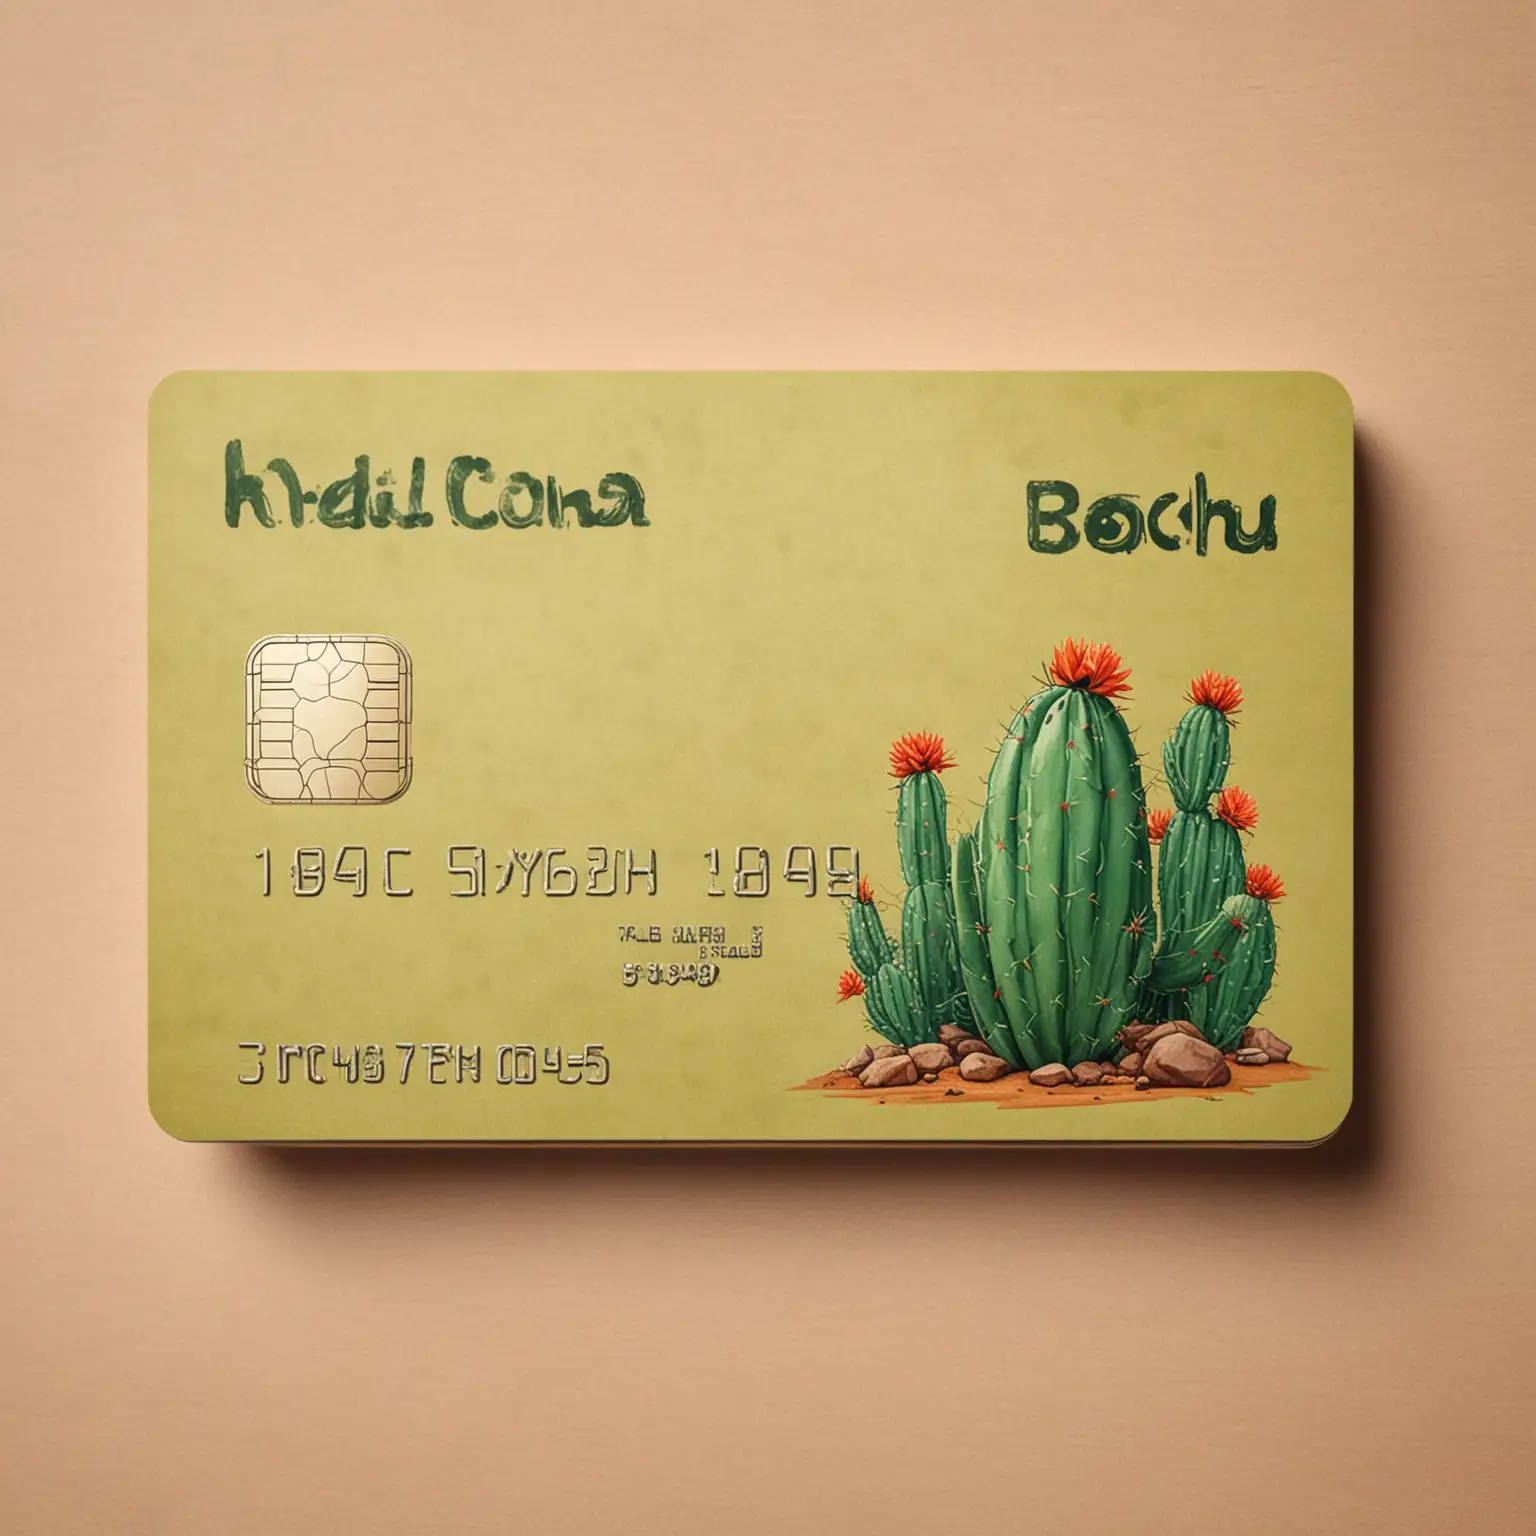 Credit Card with Cactus and BOCHU Inscription